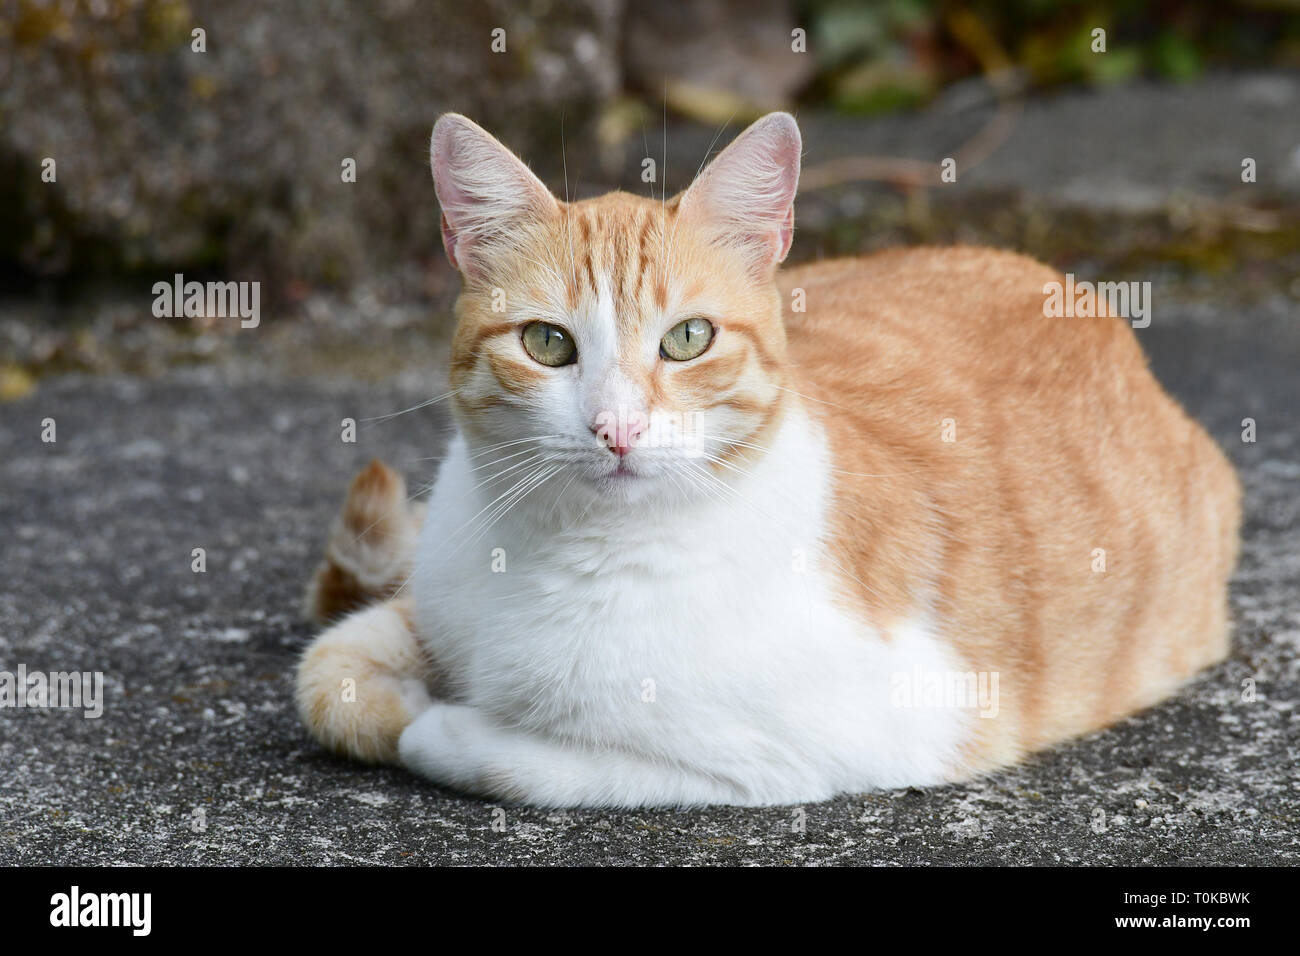 Female Cat laying on a concrete driveway Stock Photo